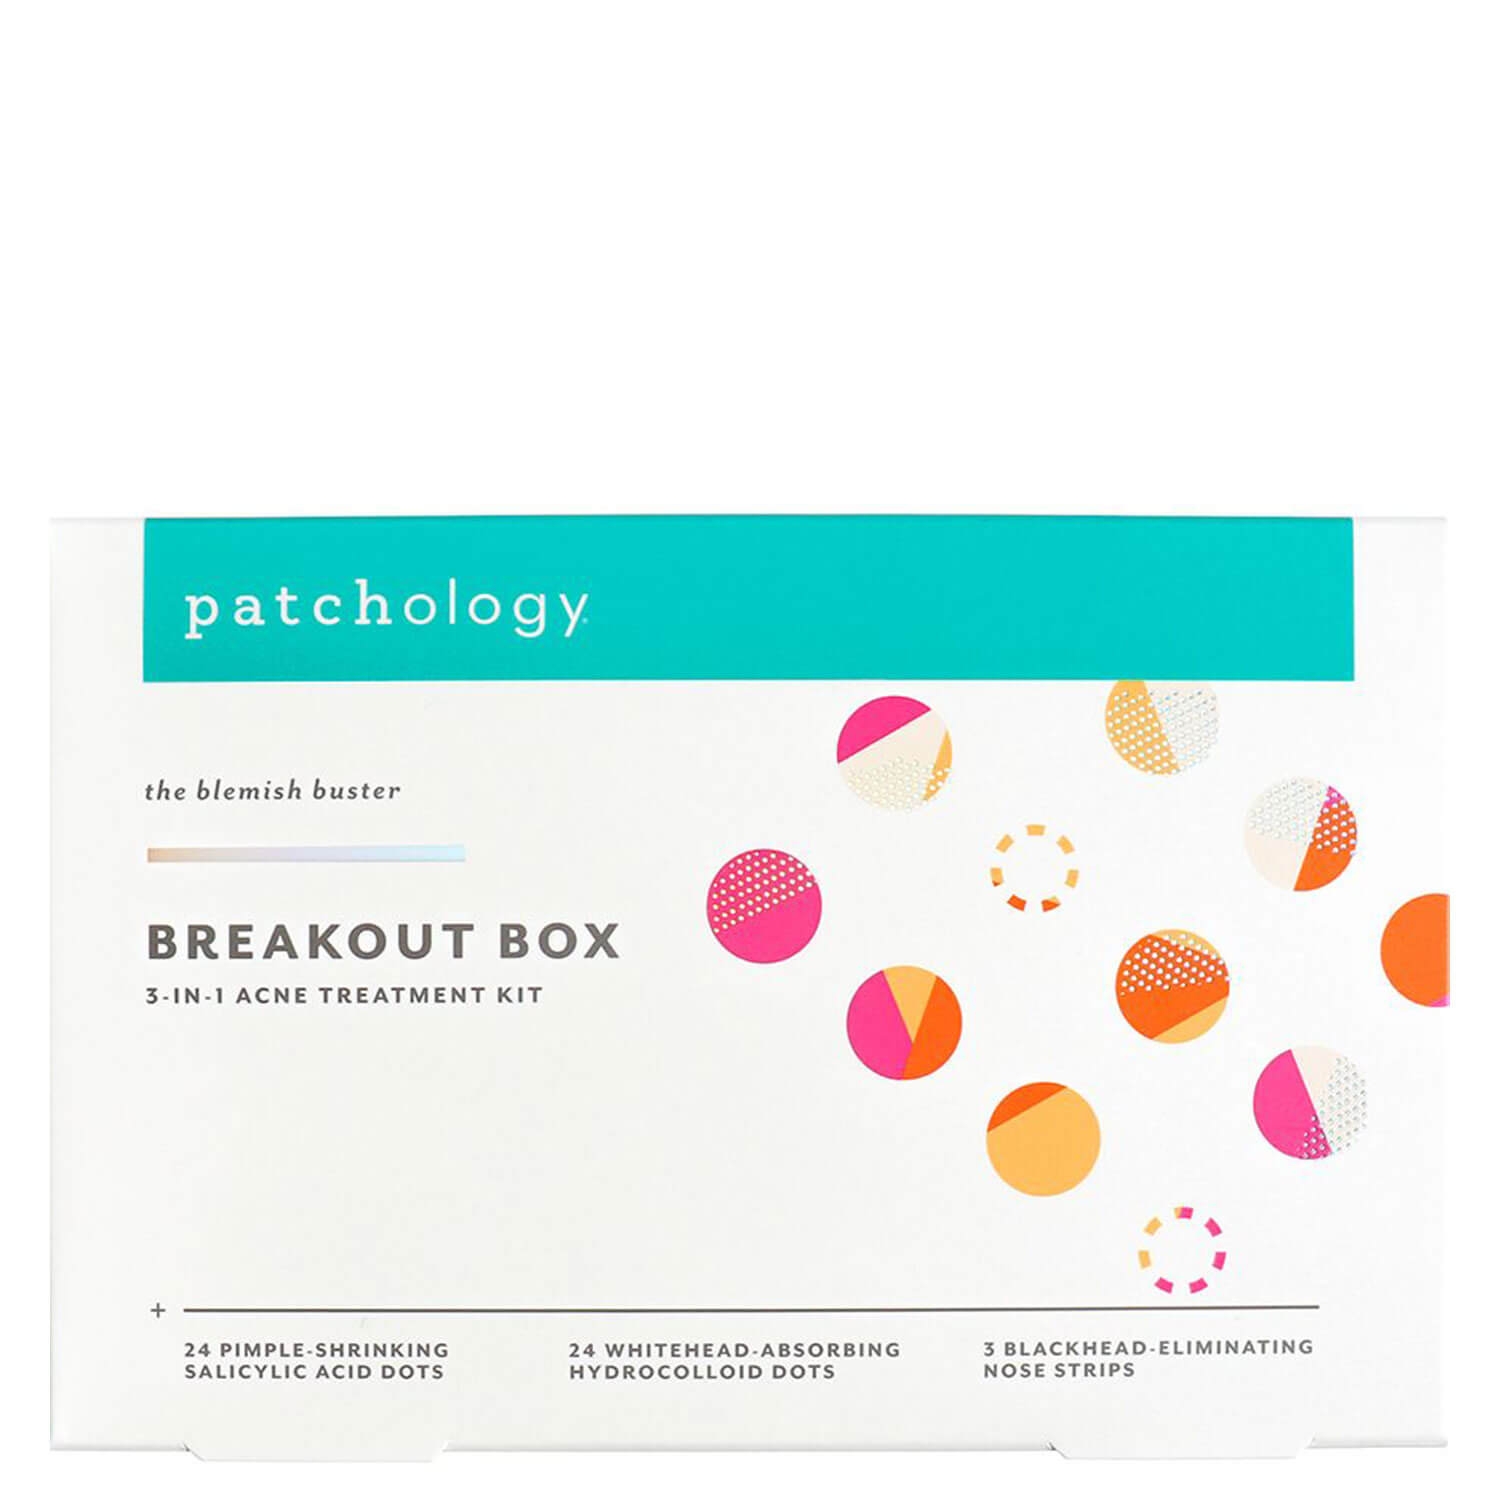 Product image from patchology Kits - Breakout Box 3-In-1 Acne Treatment Kit